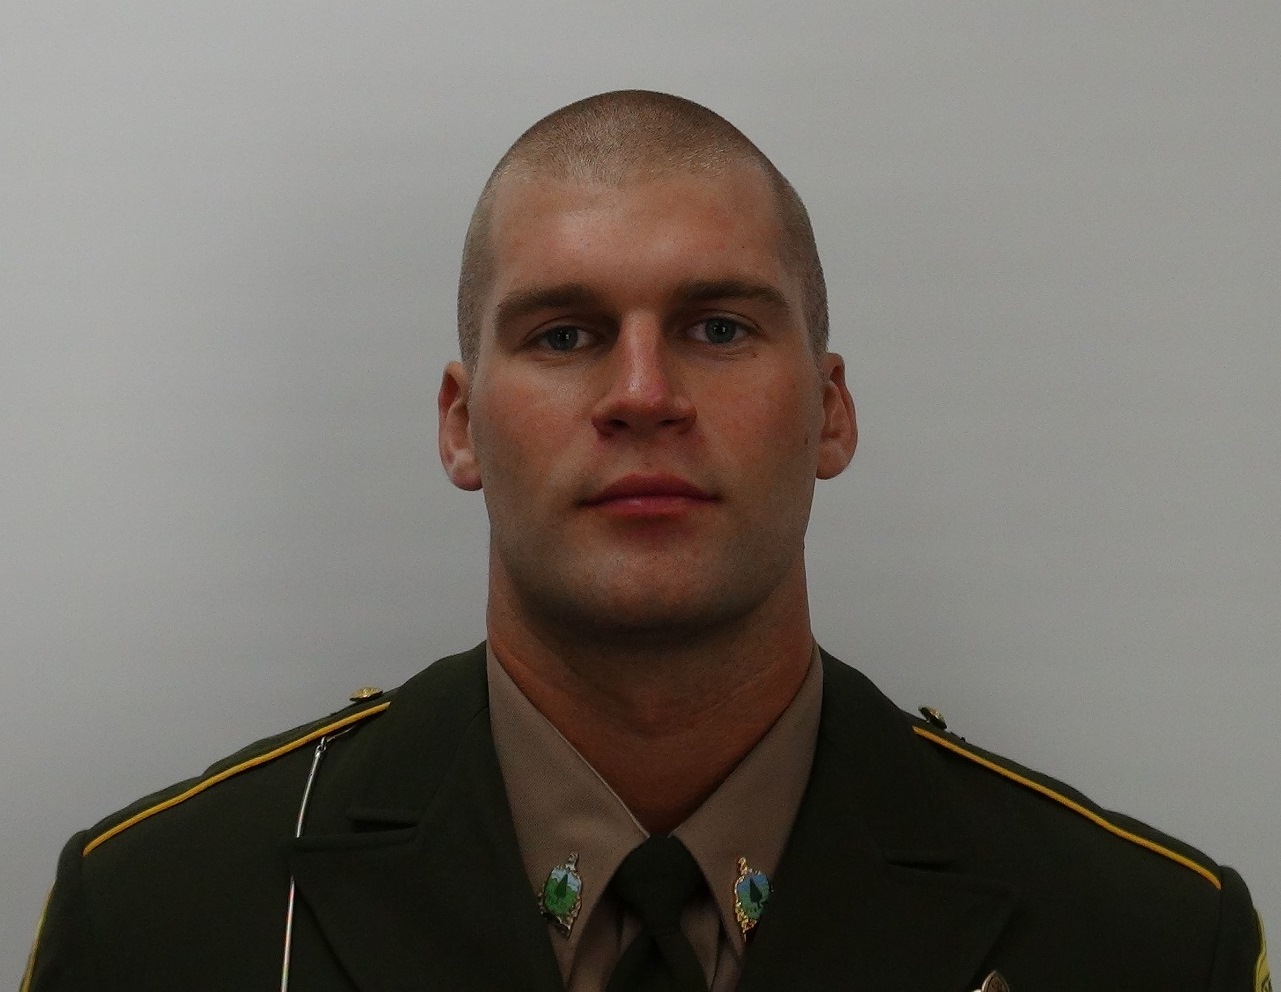 Trooper Kyle David Young | Vermont State Police, Vermont